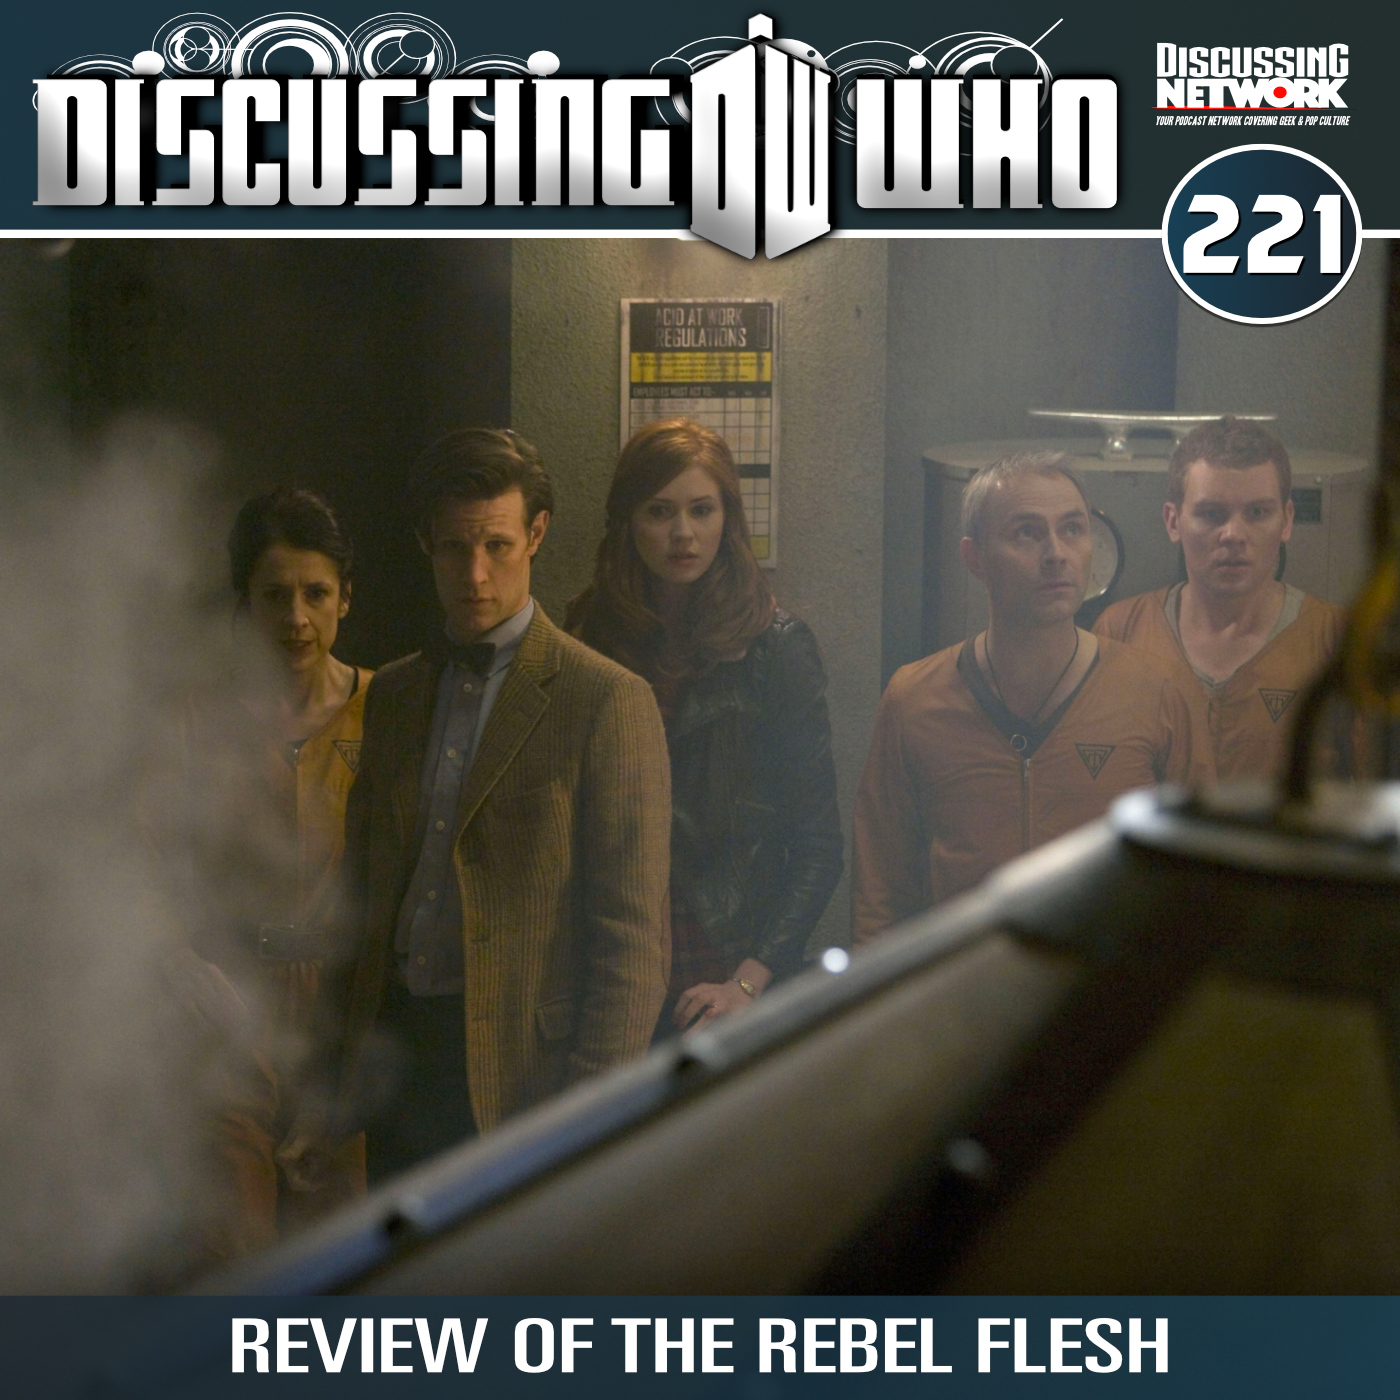 Review of The Rebel Flesh